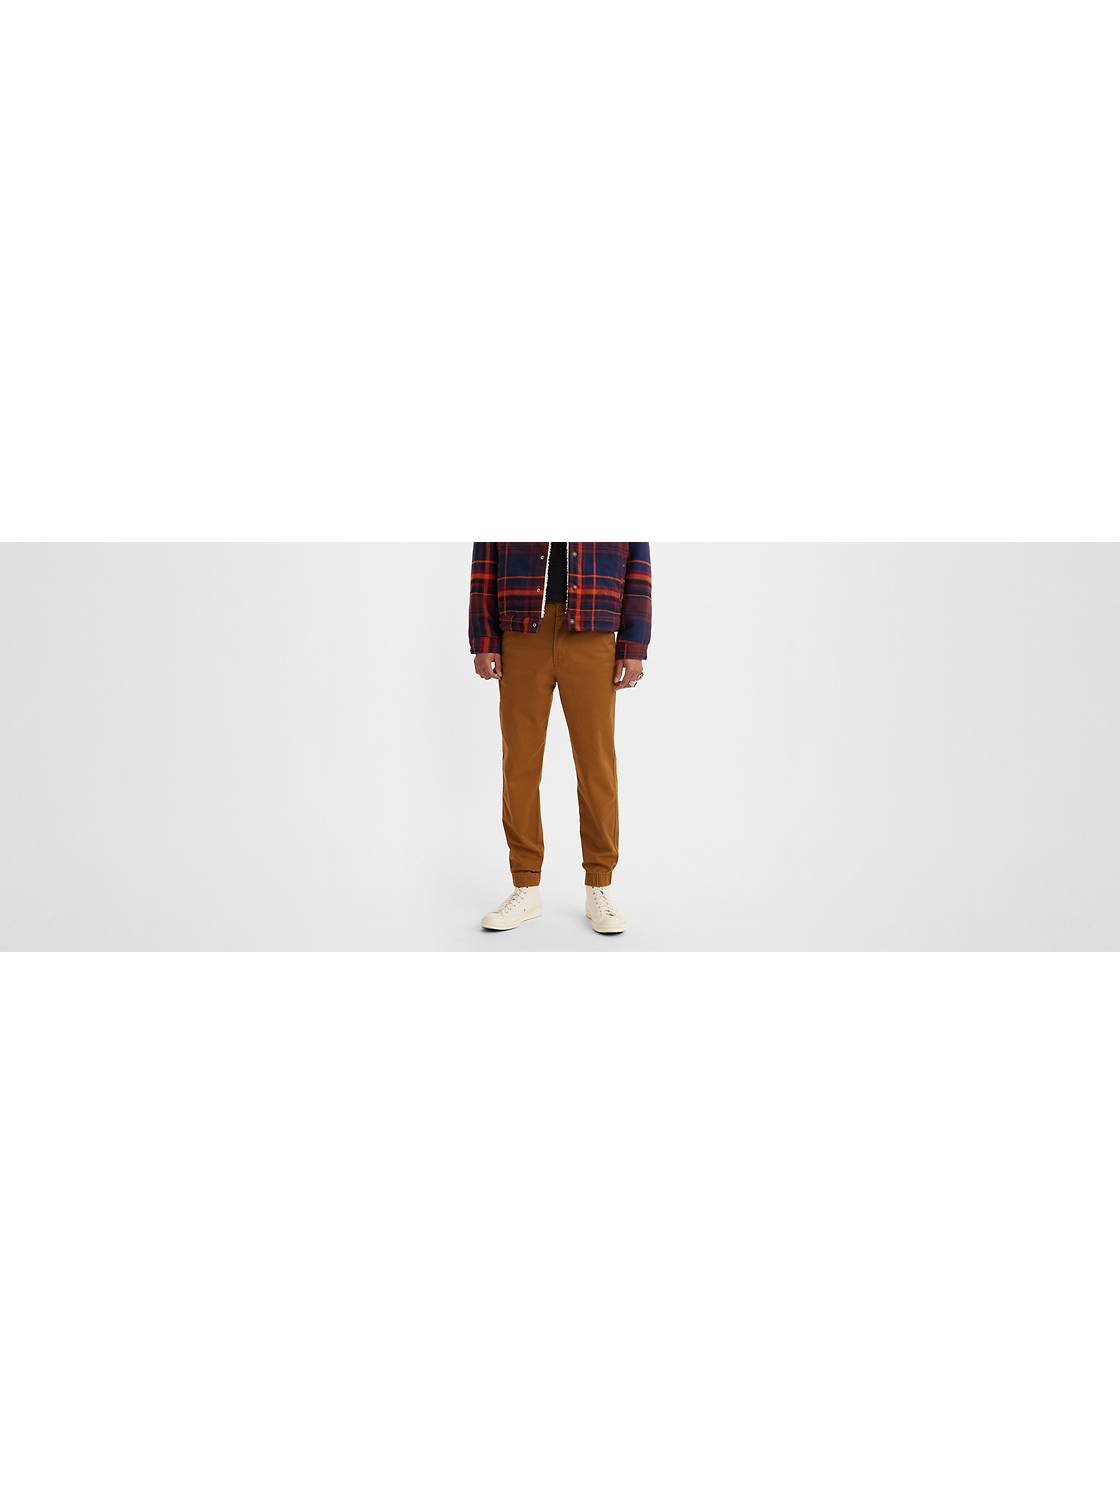 Comfortable Clothing for Men - Pants, Hoodies & More | Levi's® US